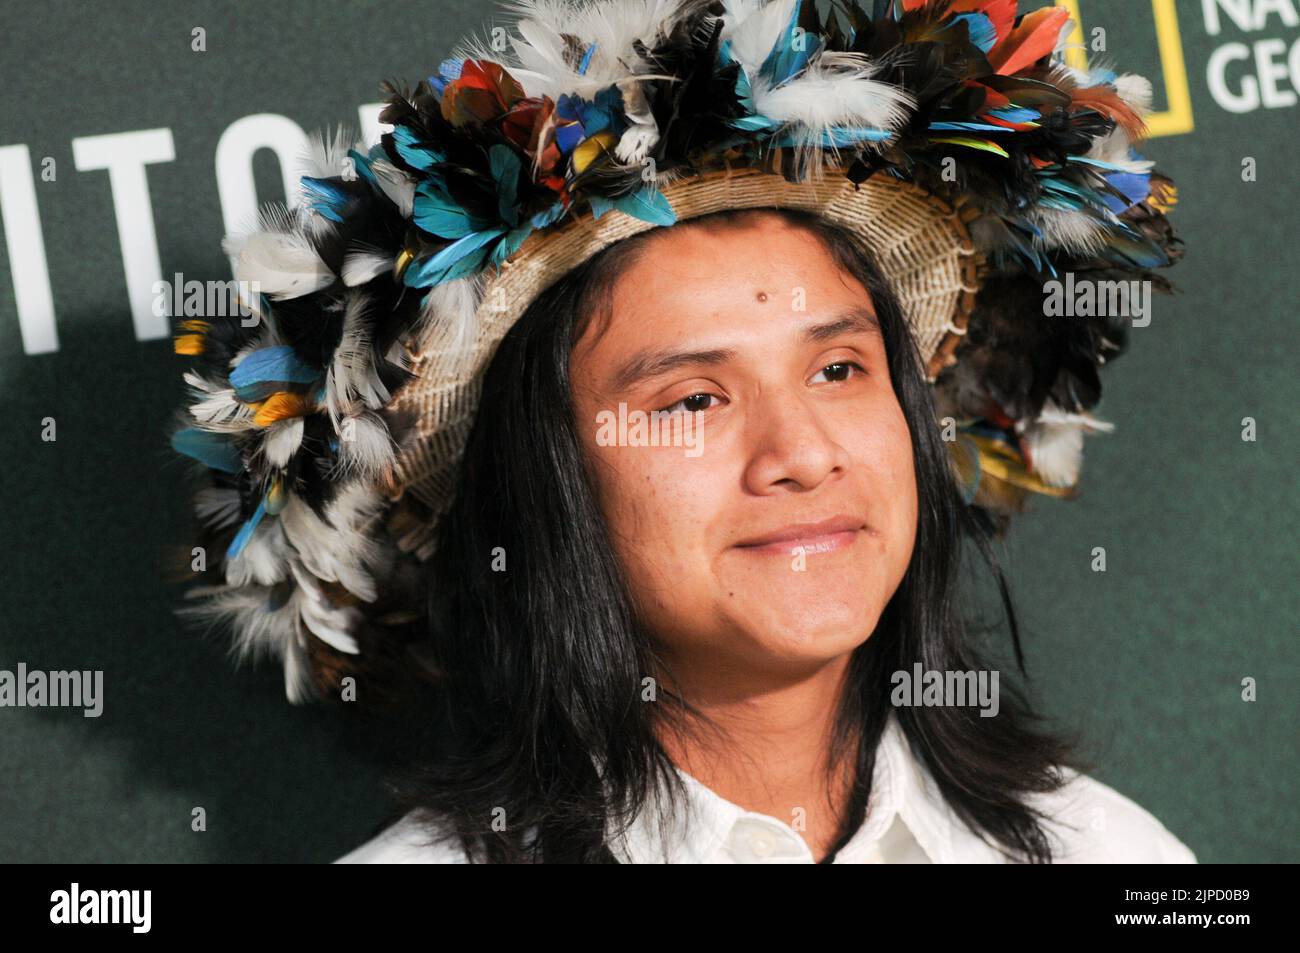 Bitate Uru-eu-wau-wau attends the 'The Territory' film premiere at Tavern On The Green in New York, NY on August 16, 2022. (Photo? by Efren Landaos/Sipa USA) Stock Photo